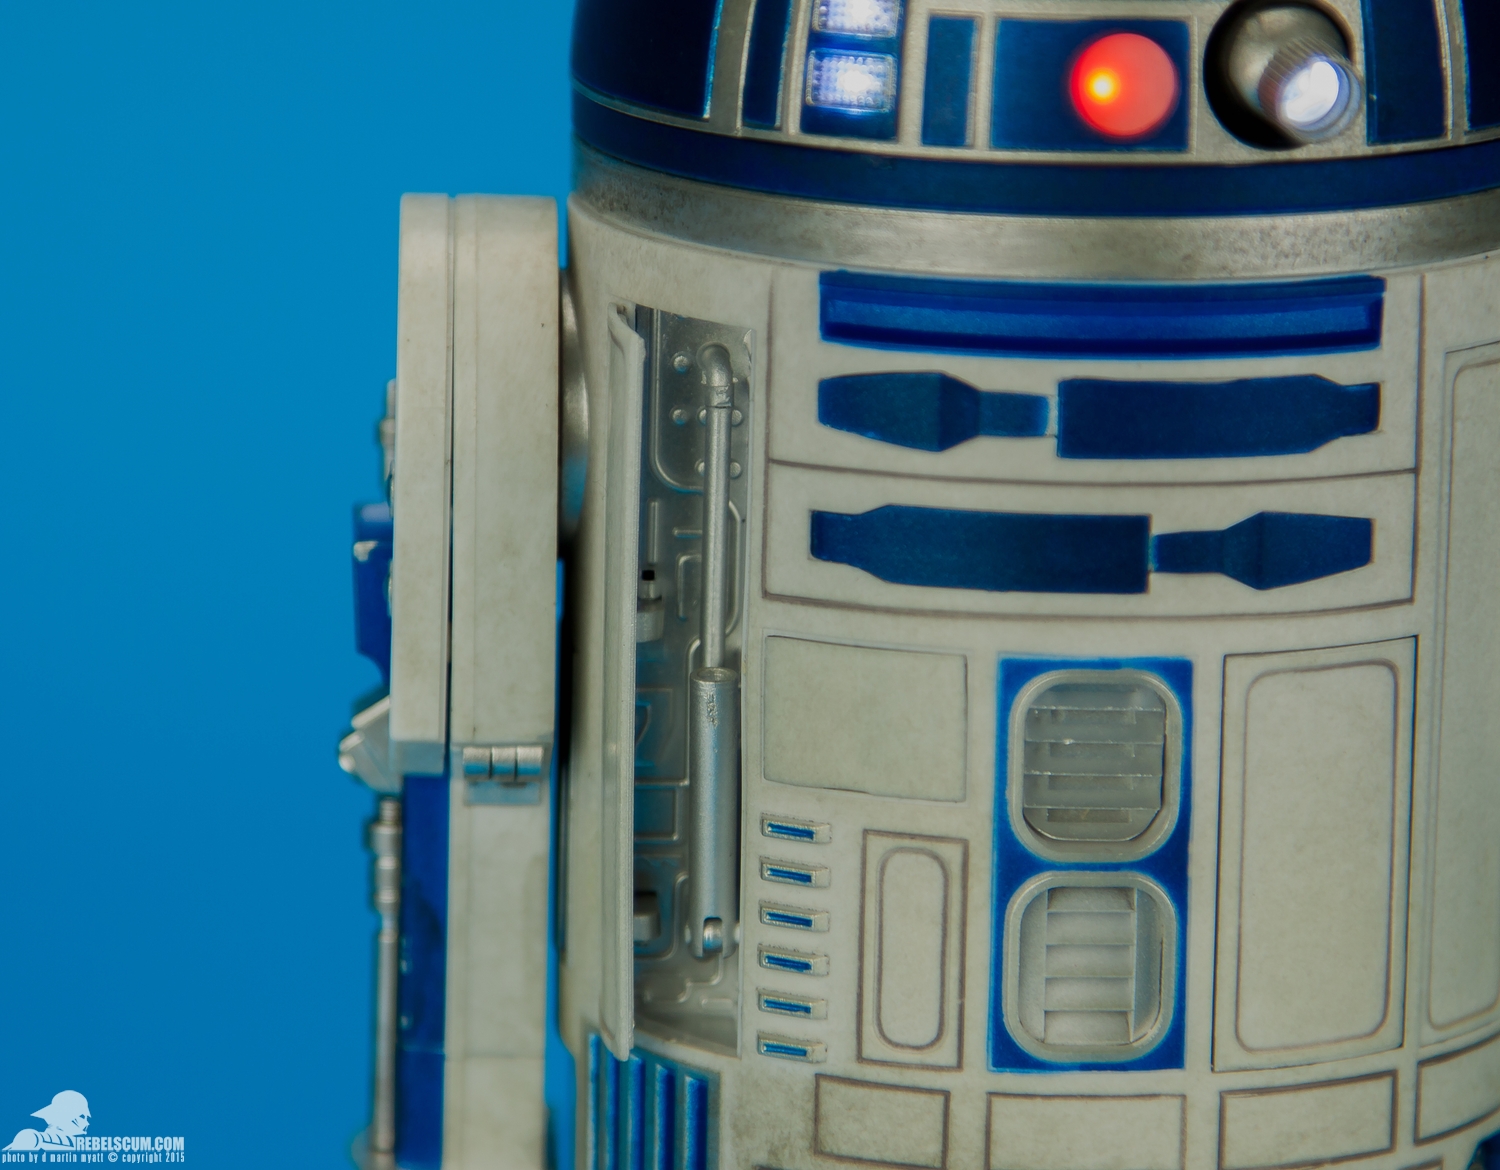 Sideshow-Collectibles-R2-D2-Sixth-Scale-Figure-Review-038.jpg